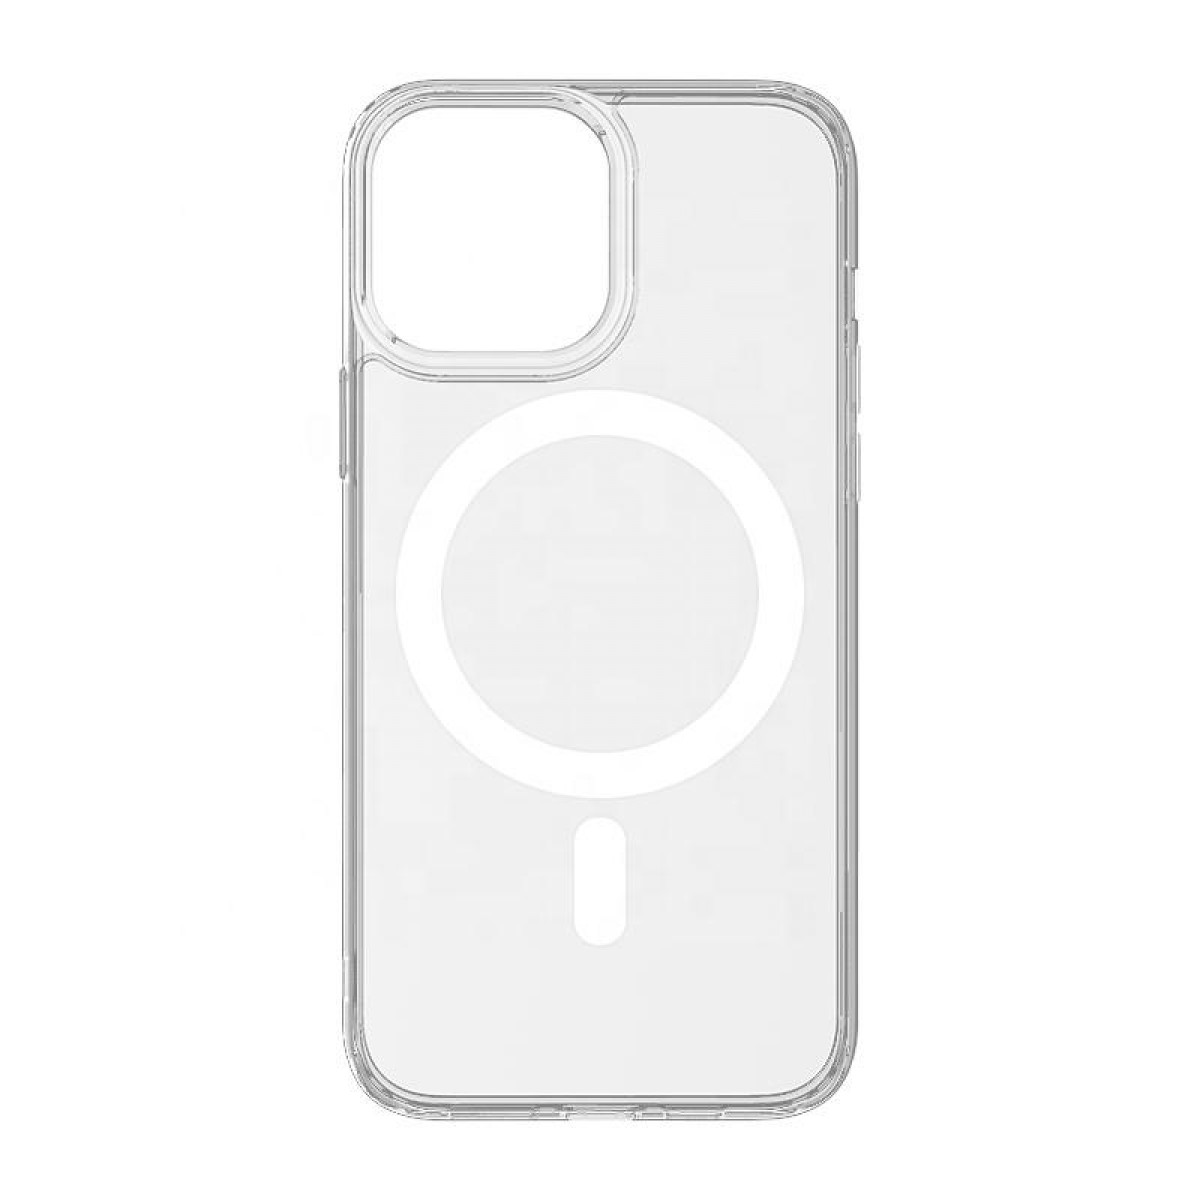 iPhone MagSafe-Ladegerät Max Weiß für Transparent, INF Max, iPhone Backcover, 11 iPhone, Pro Pro Handyhülle 11